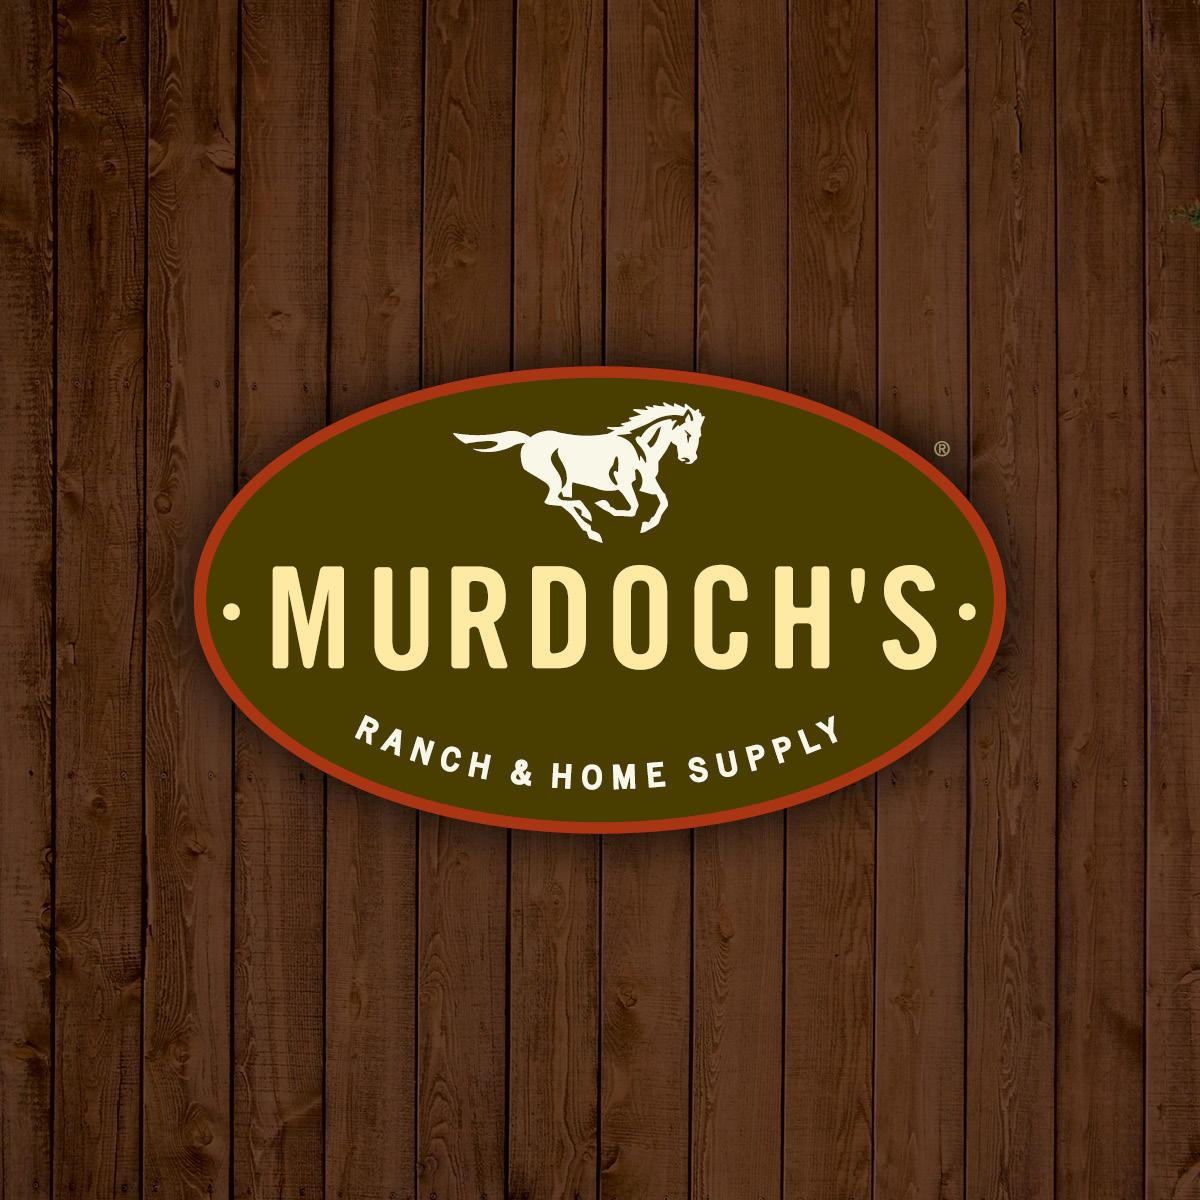 Murdoch's Ranch & Home Supply - Evansville, WY 82636 - (307)266-0734 | ShowMeLocal.com